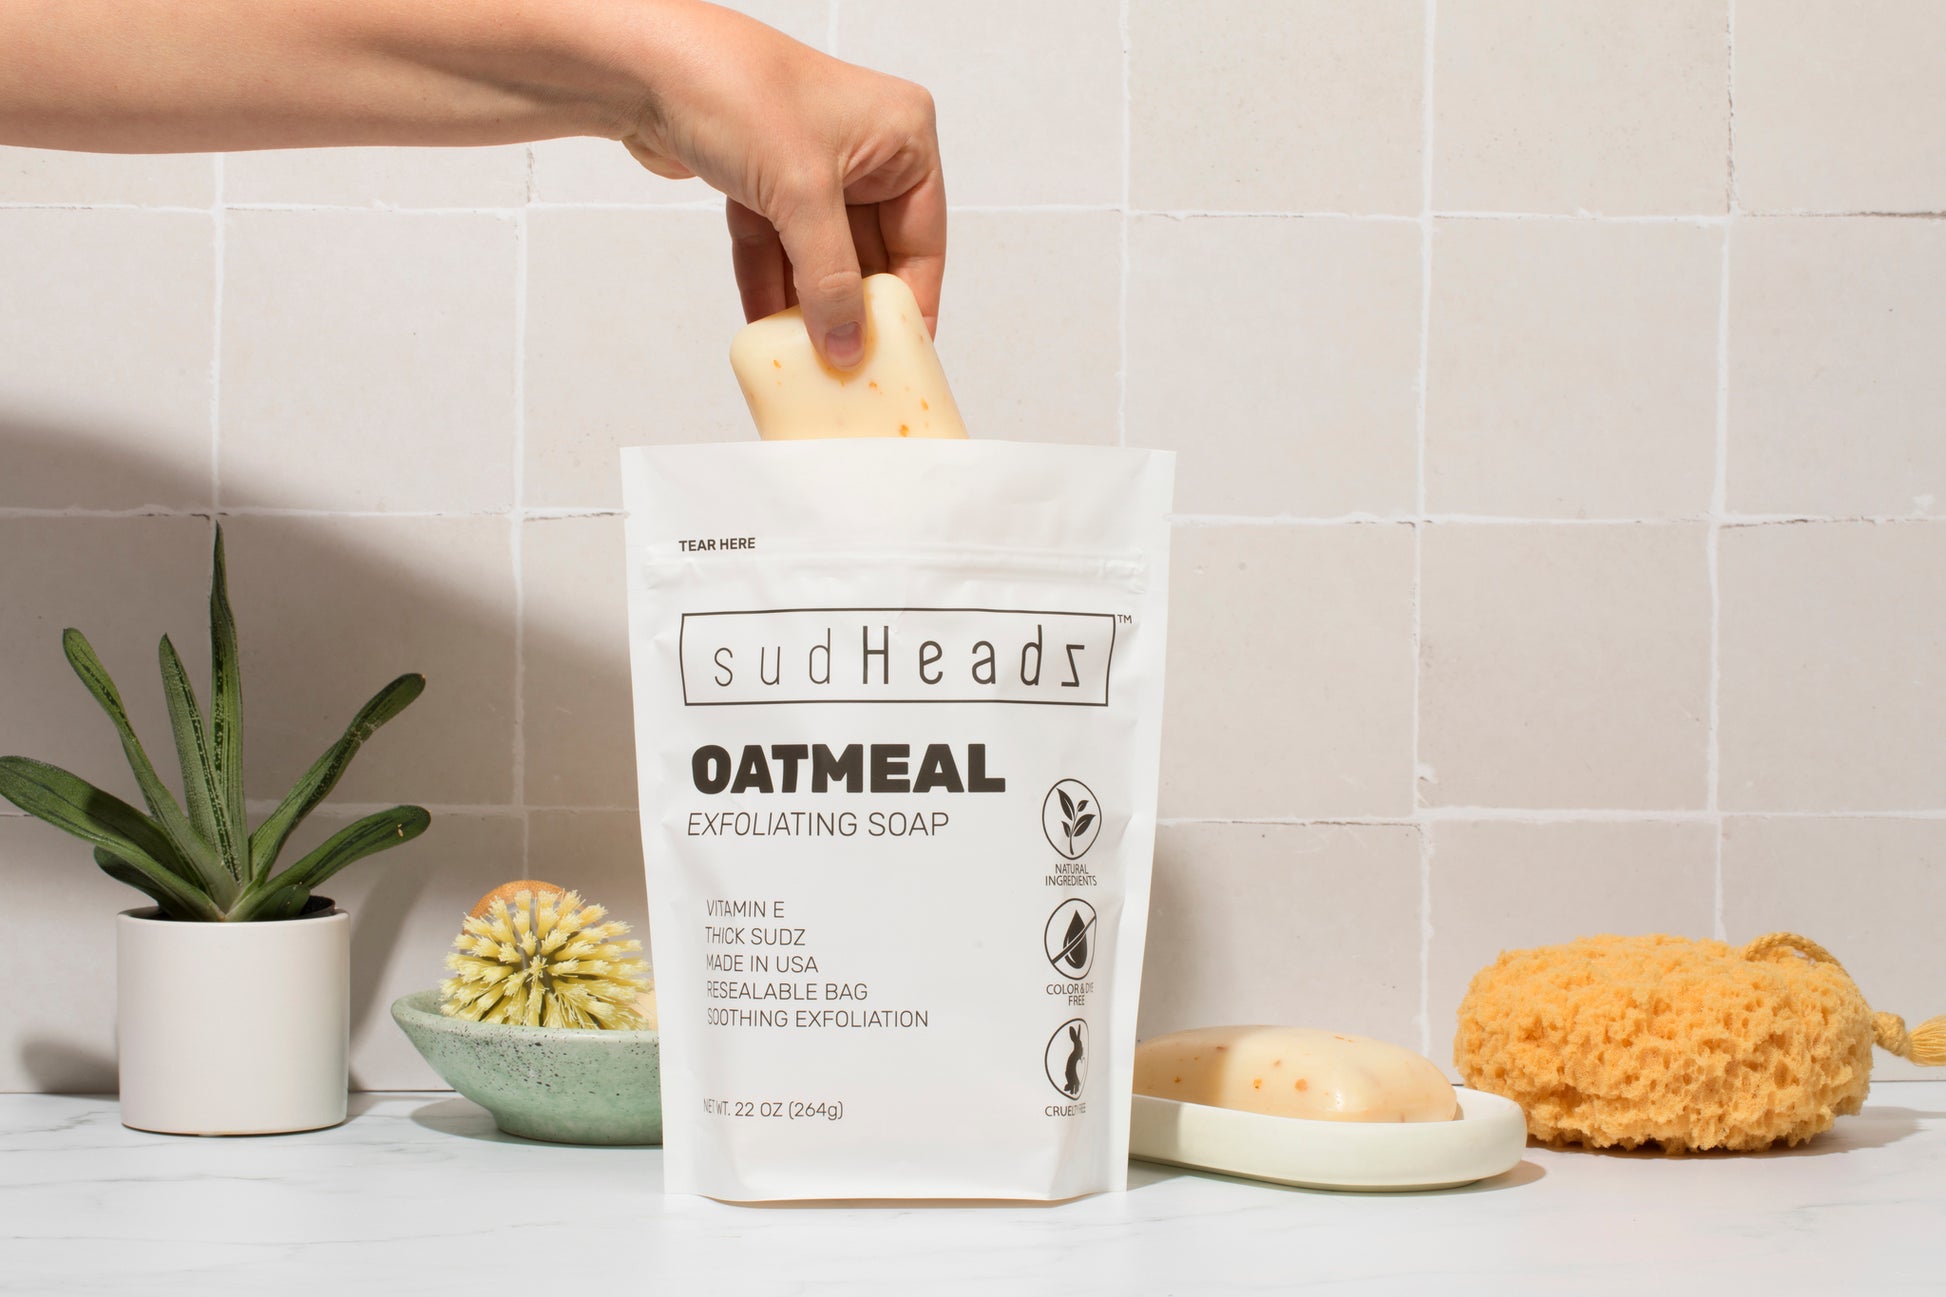  sudHeadz All Natural Oatmeal Bar Soaps - Face and Body  Exfoliating Scrub with Colloidal Oatmeal - Paraben & Sulfate Free  Moisturizing Wash for Dry Skin, Psoriasis, Eczema, and Sensitive Skin 